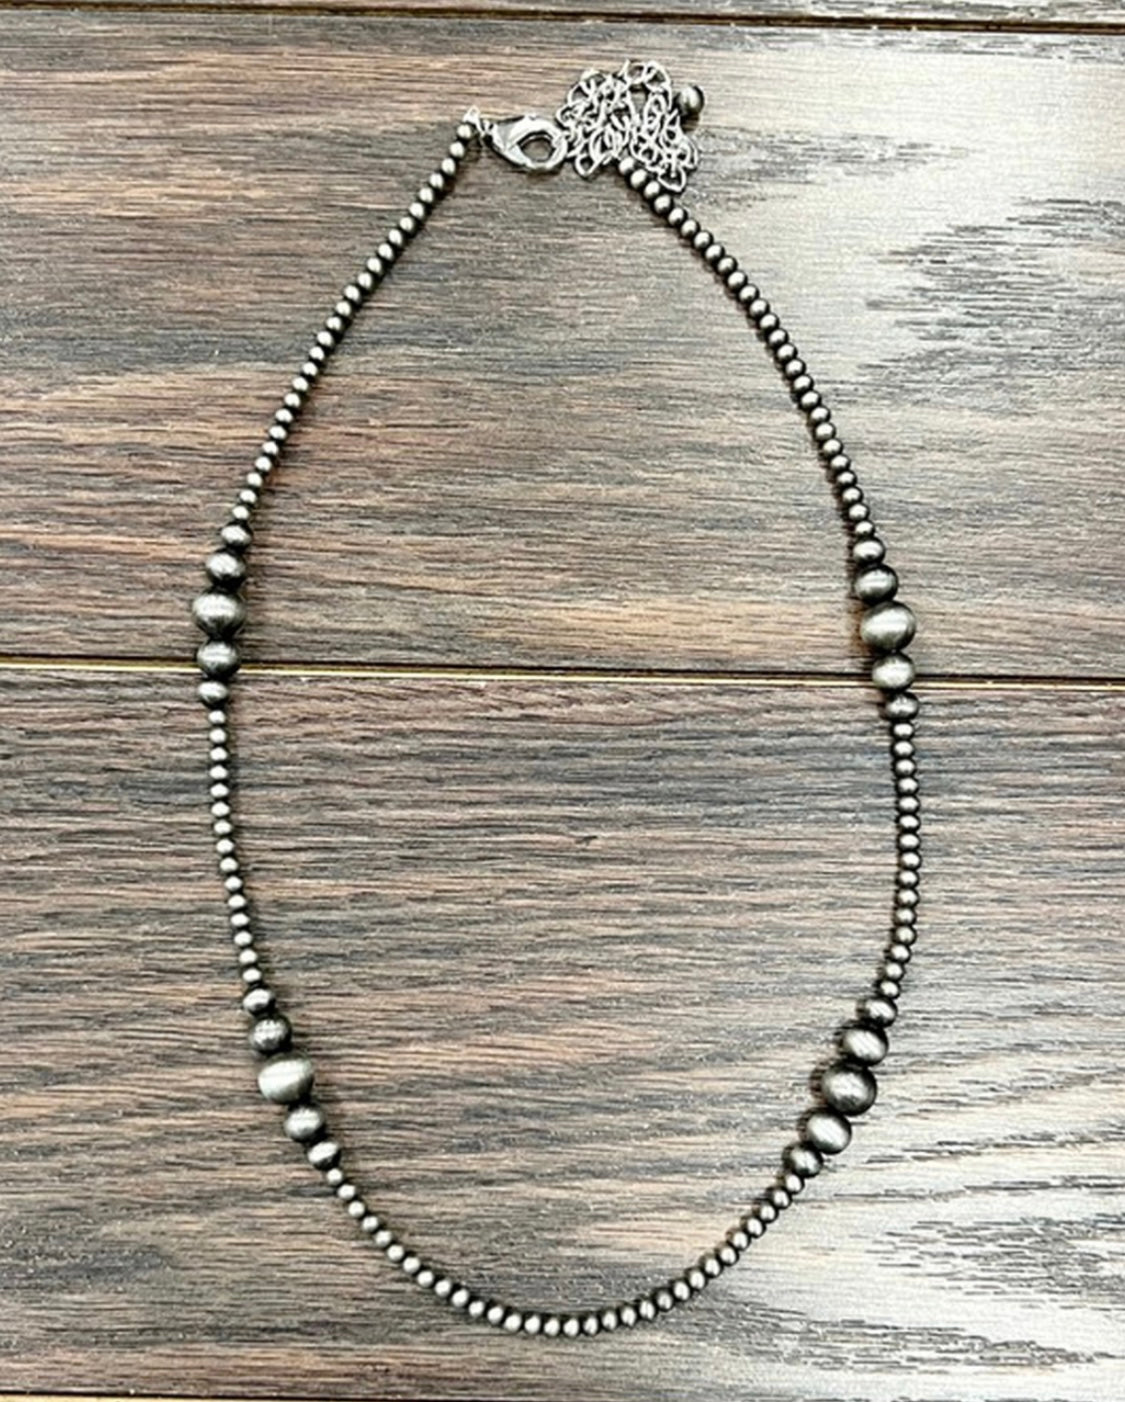 Clustered Navajo Pearl Necklace